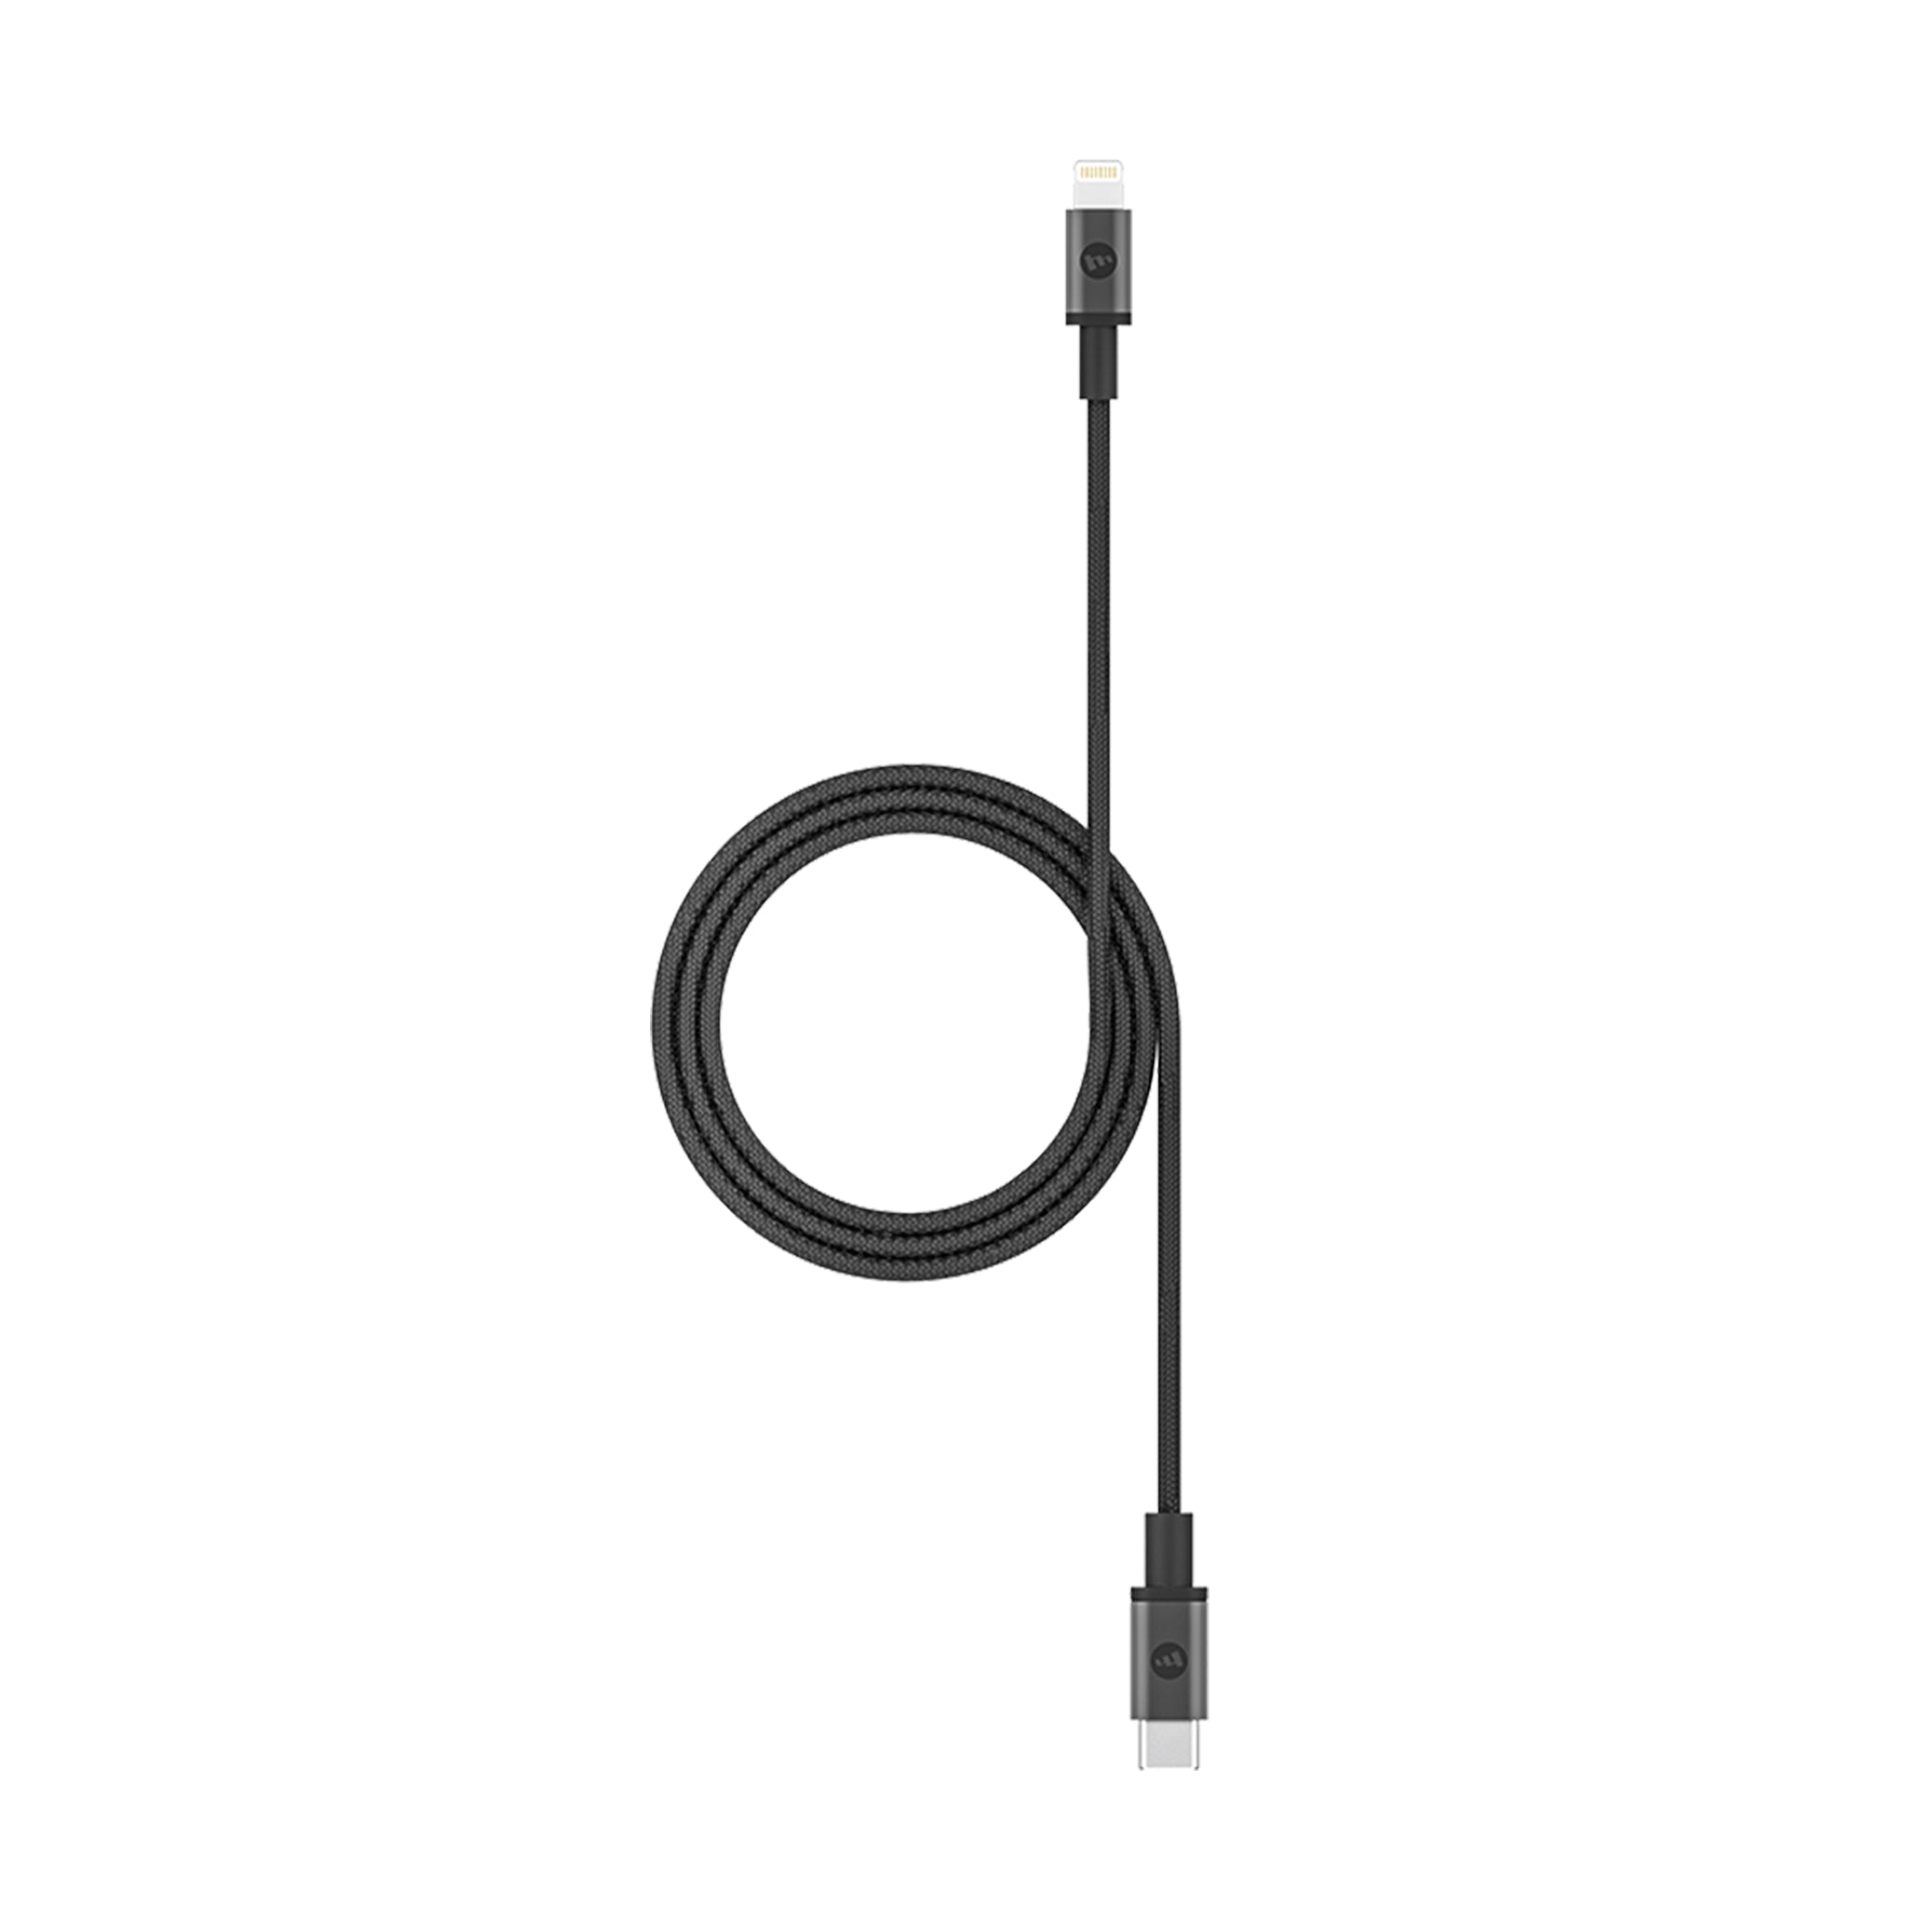 Mophie - Usb C To Apple Lightning Cable 3ft - Black